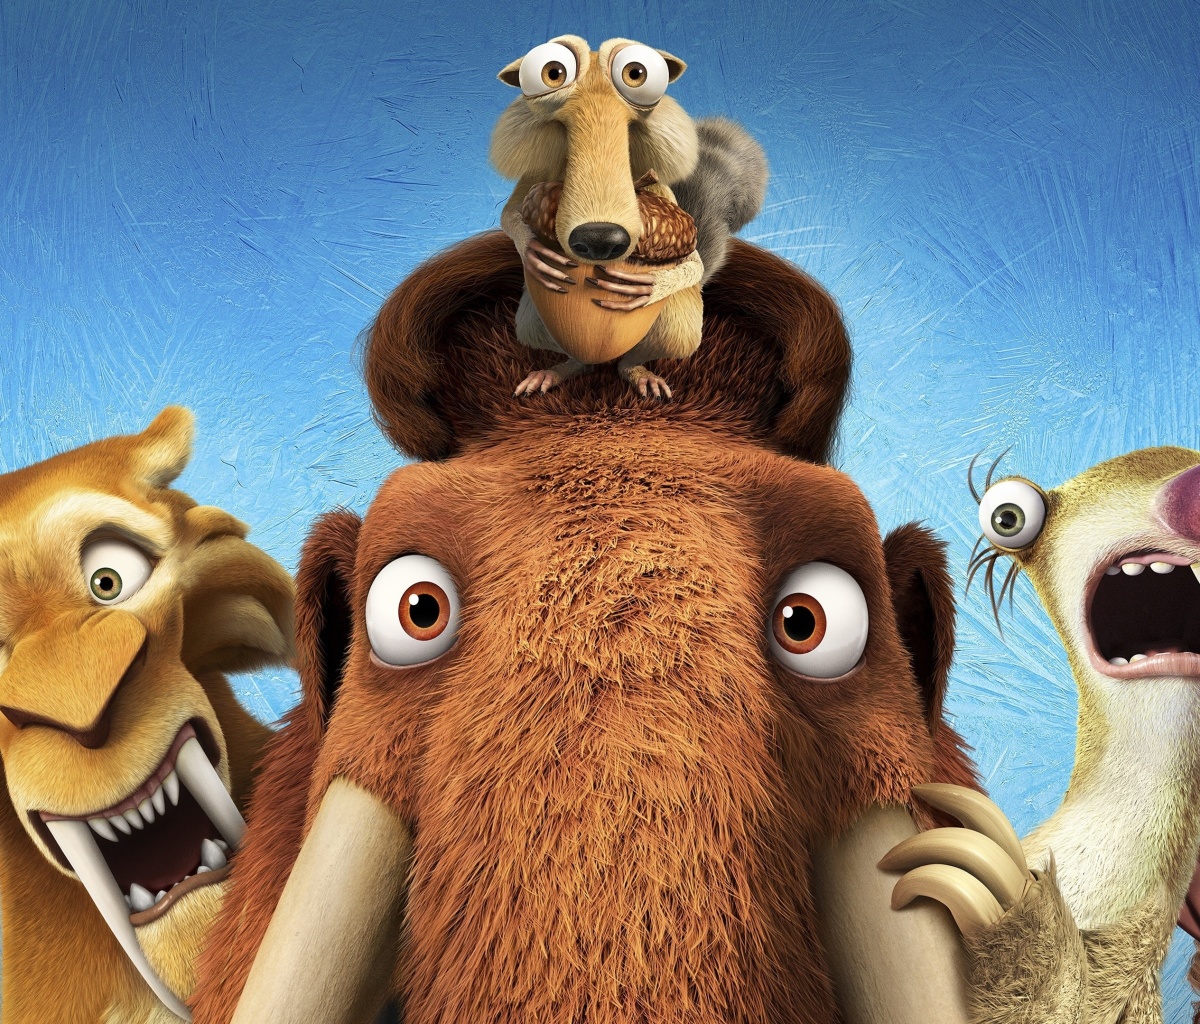 Das Ice Age 5 Collision Course with Diego, Manny, Scrat, Sid, Mammoths Wallpaper 1200x1024